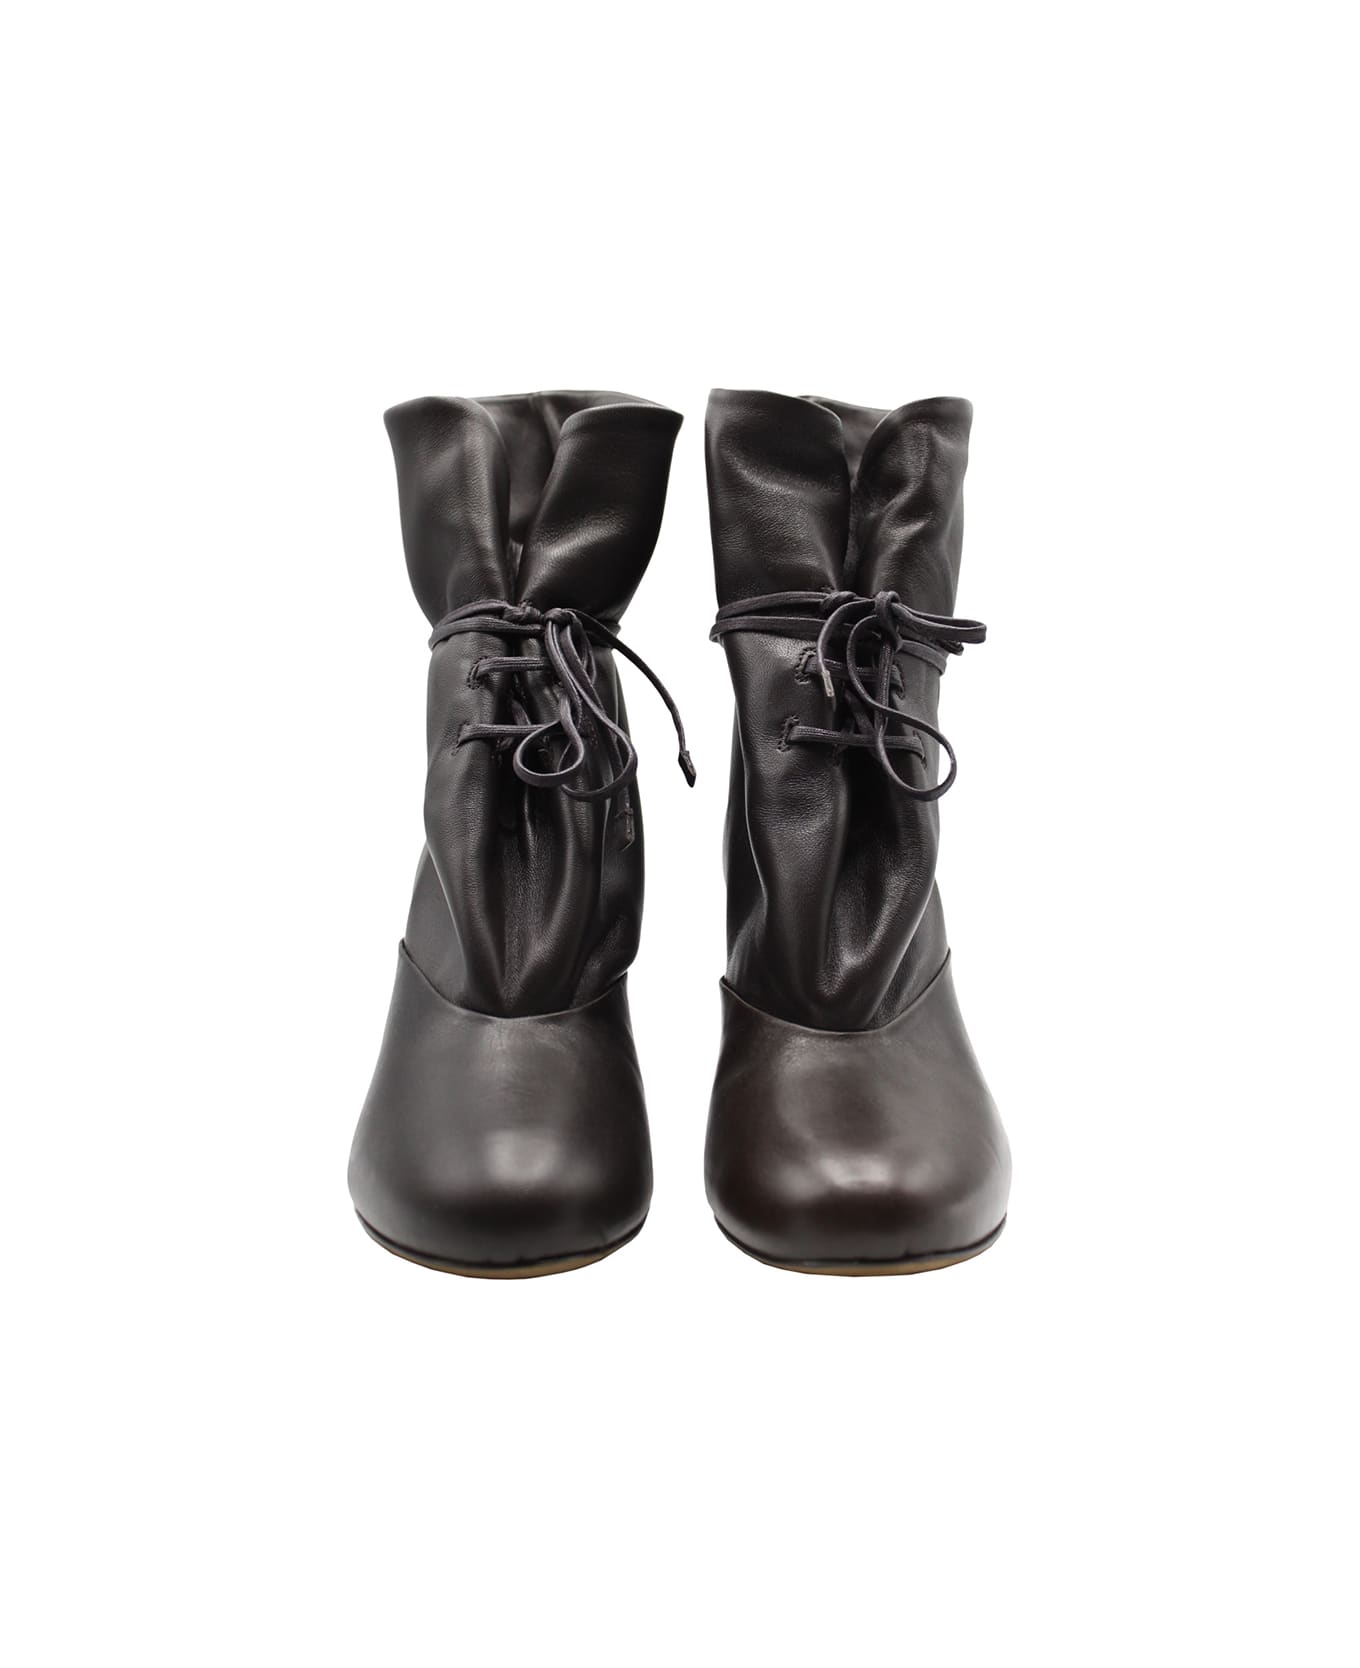 Lemaire Roud Toe Lace Boot 80 - Dark Chocolate ブーツ